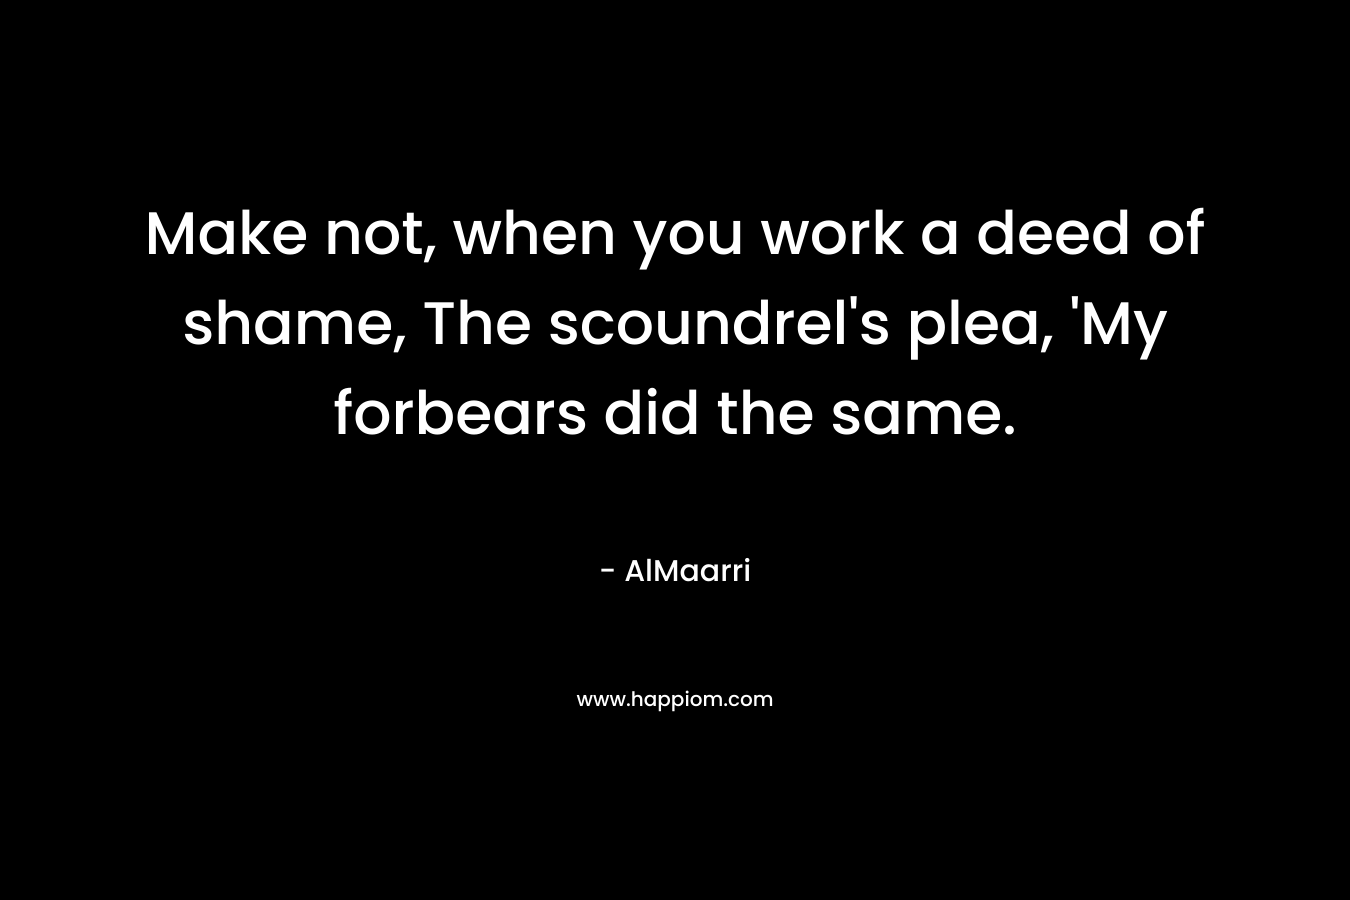 Make not, when you work a deed of shame, The scoundrel's plea, 'My forbears did the same.